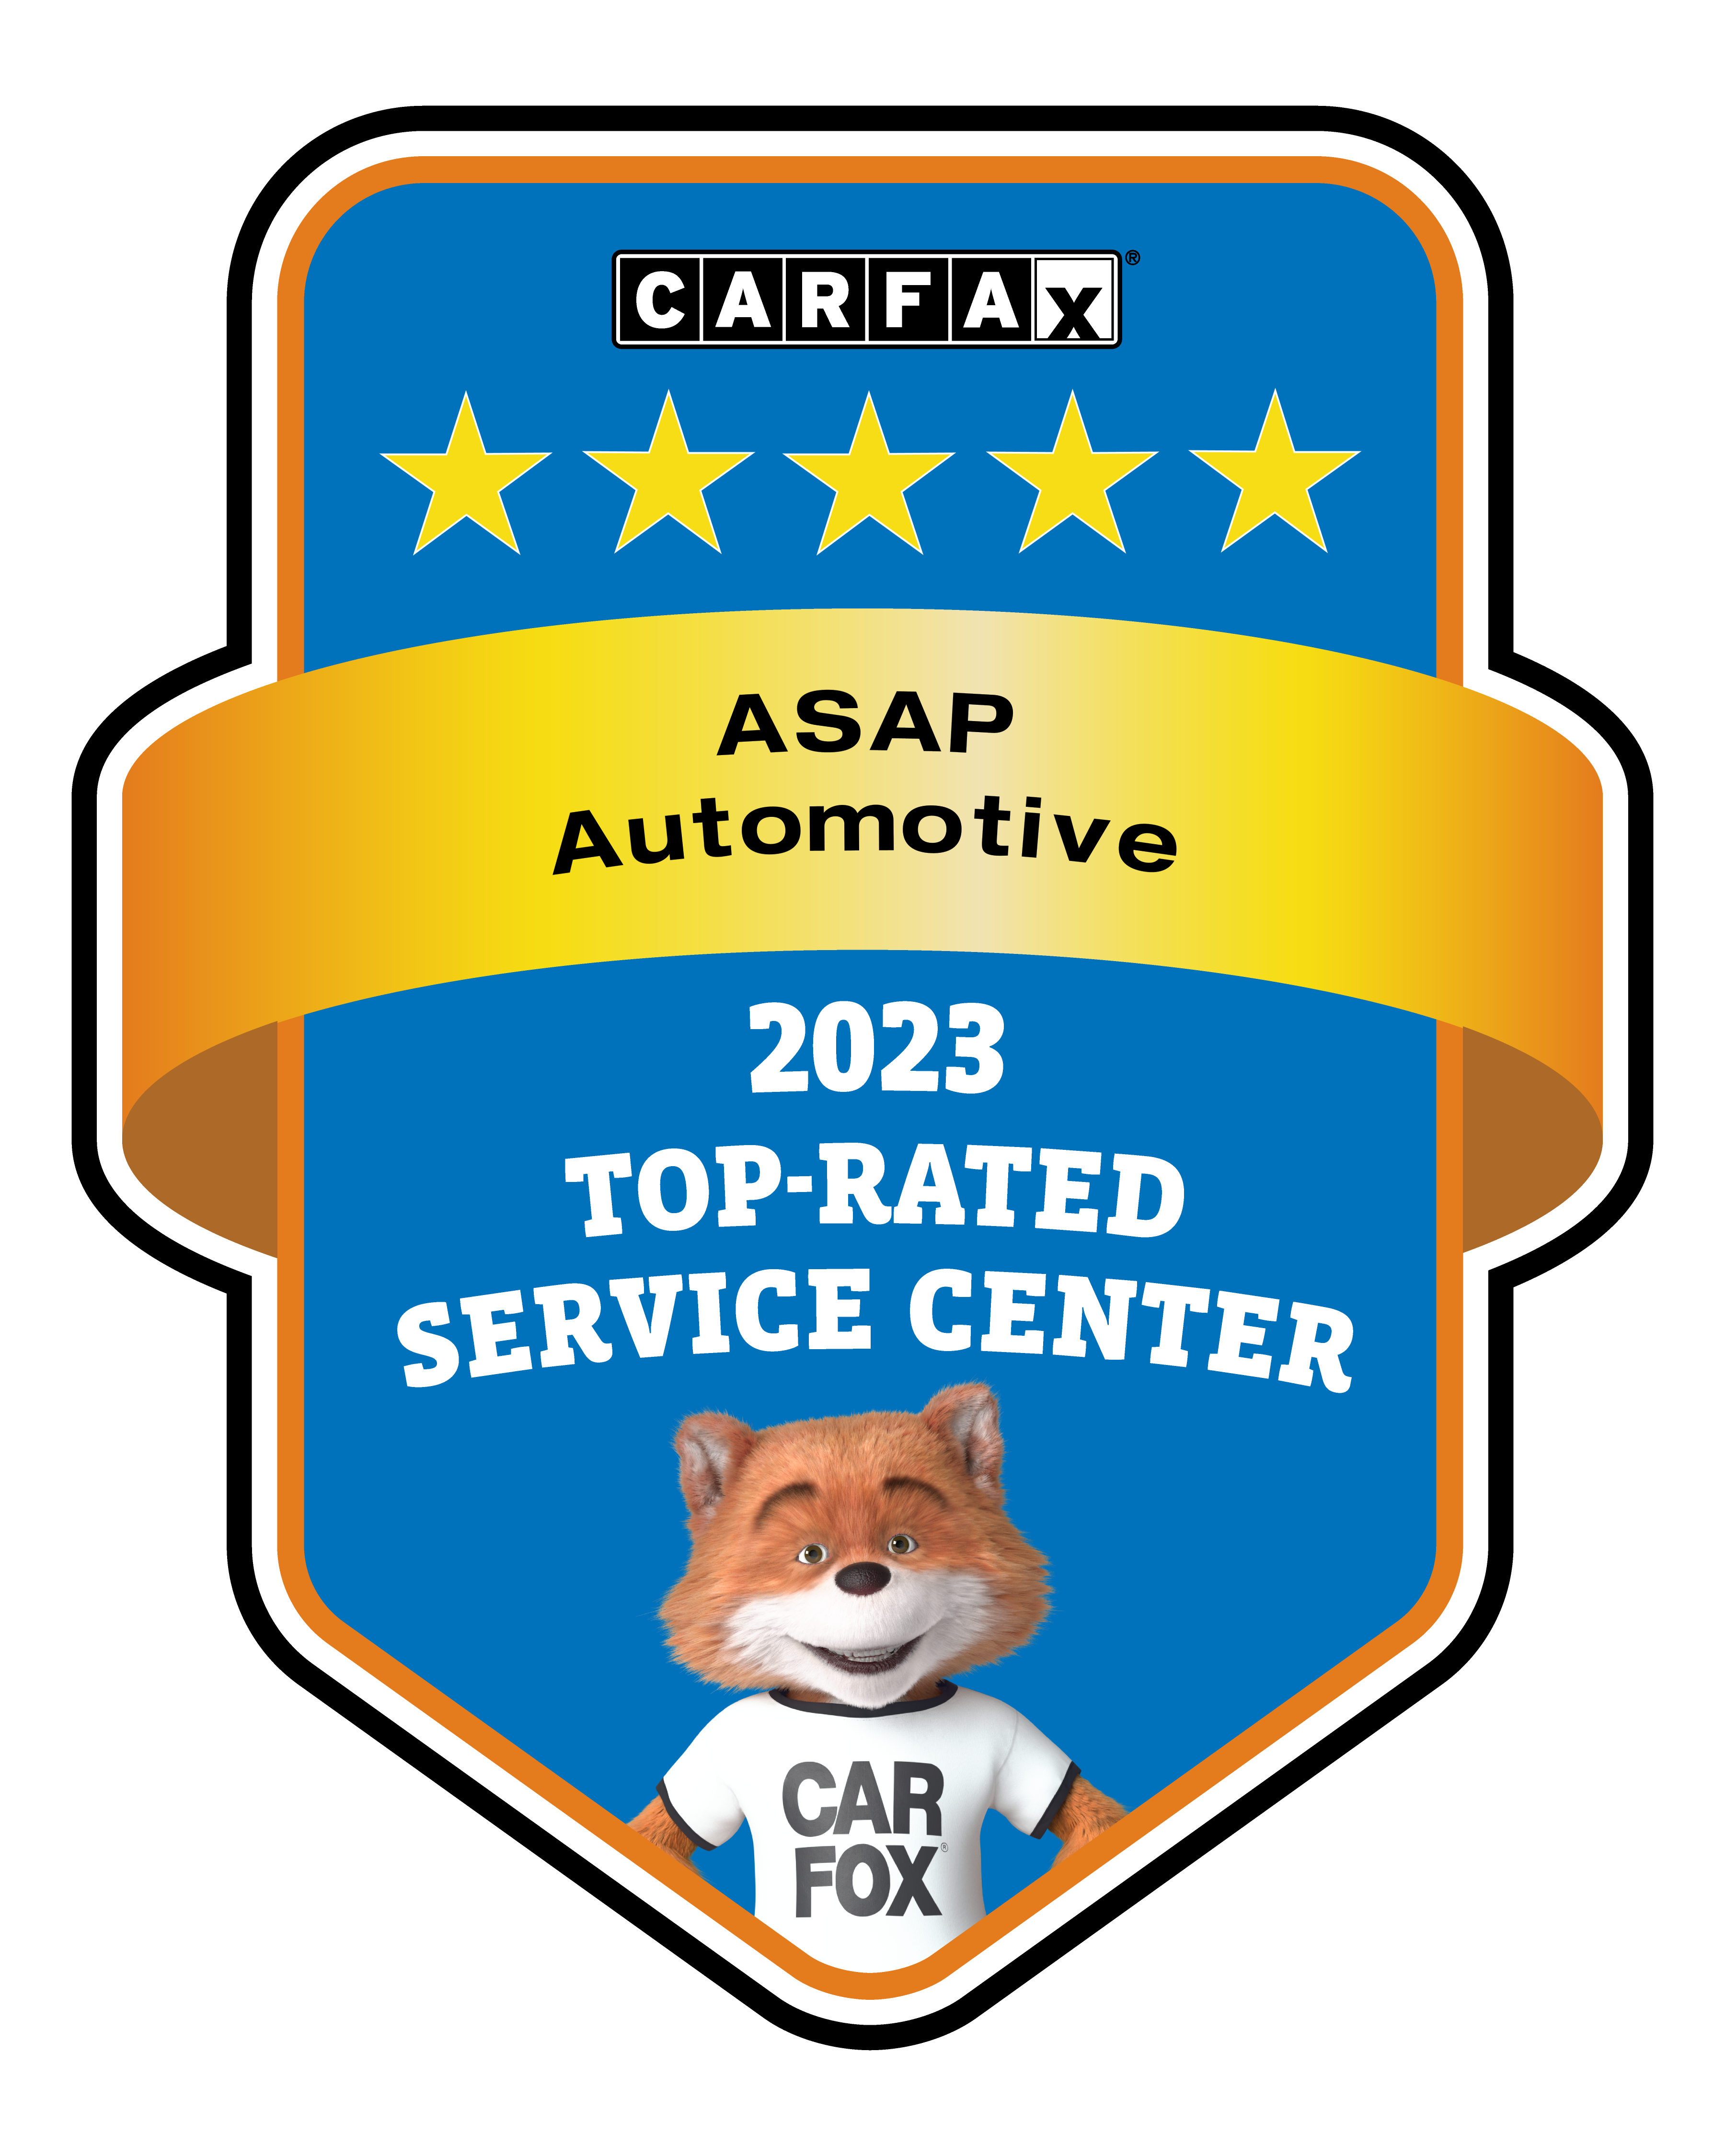 CARFAX 2023 Top-Rated Service Center